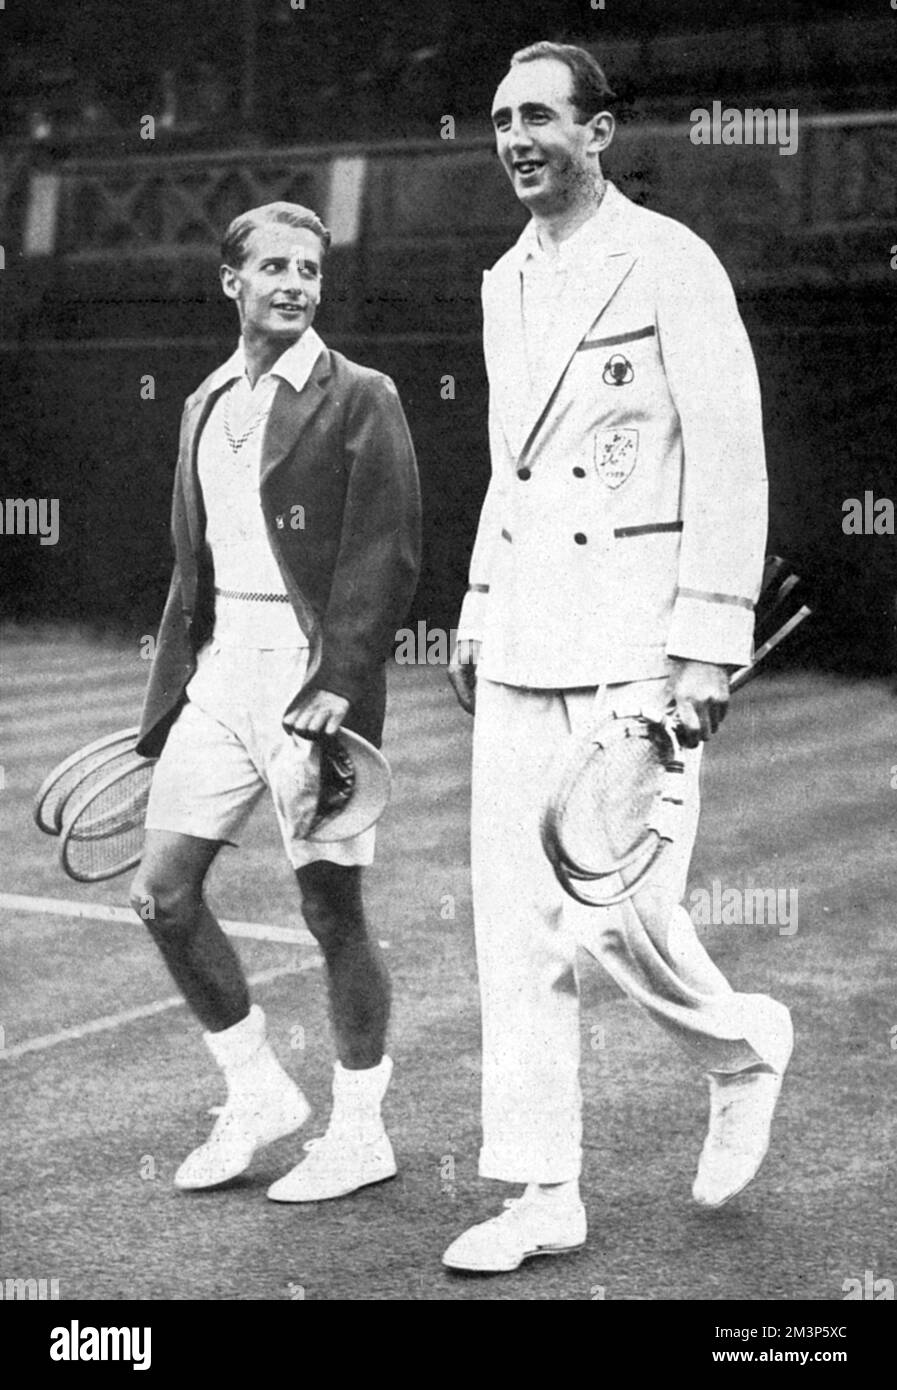 Henry Wilfred 'Bunny' Austin (1906-2000), looks up at the towering frame of his 6 ft 7 inche opponent, Lyttelton Rogers of Ireland, coming out to play the first match at Wimbledon in the Coronation Year Lawn Tennis Championships.  Austin won the four-set match, 3-6, 8-6, 6-1, 6-2.     Date: 1937 Stock Photo